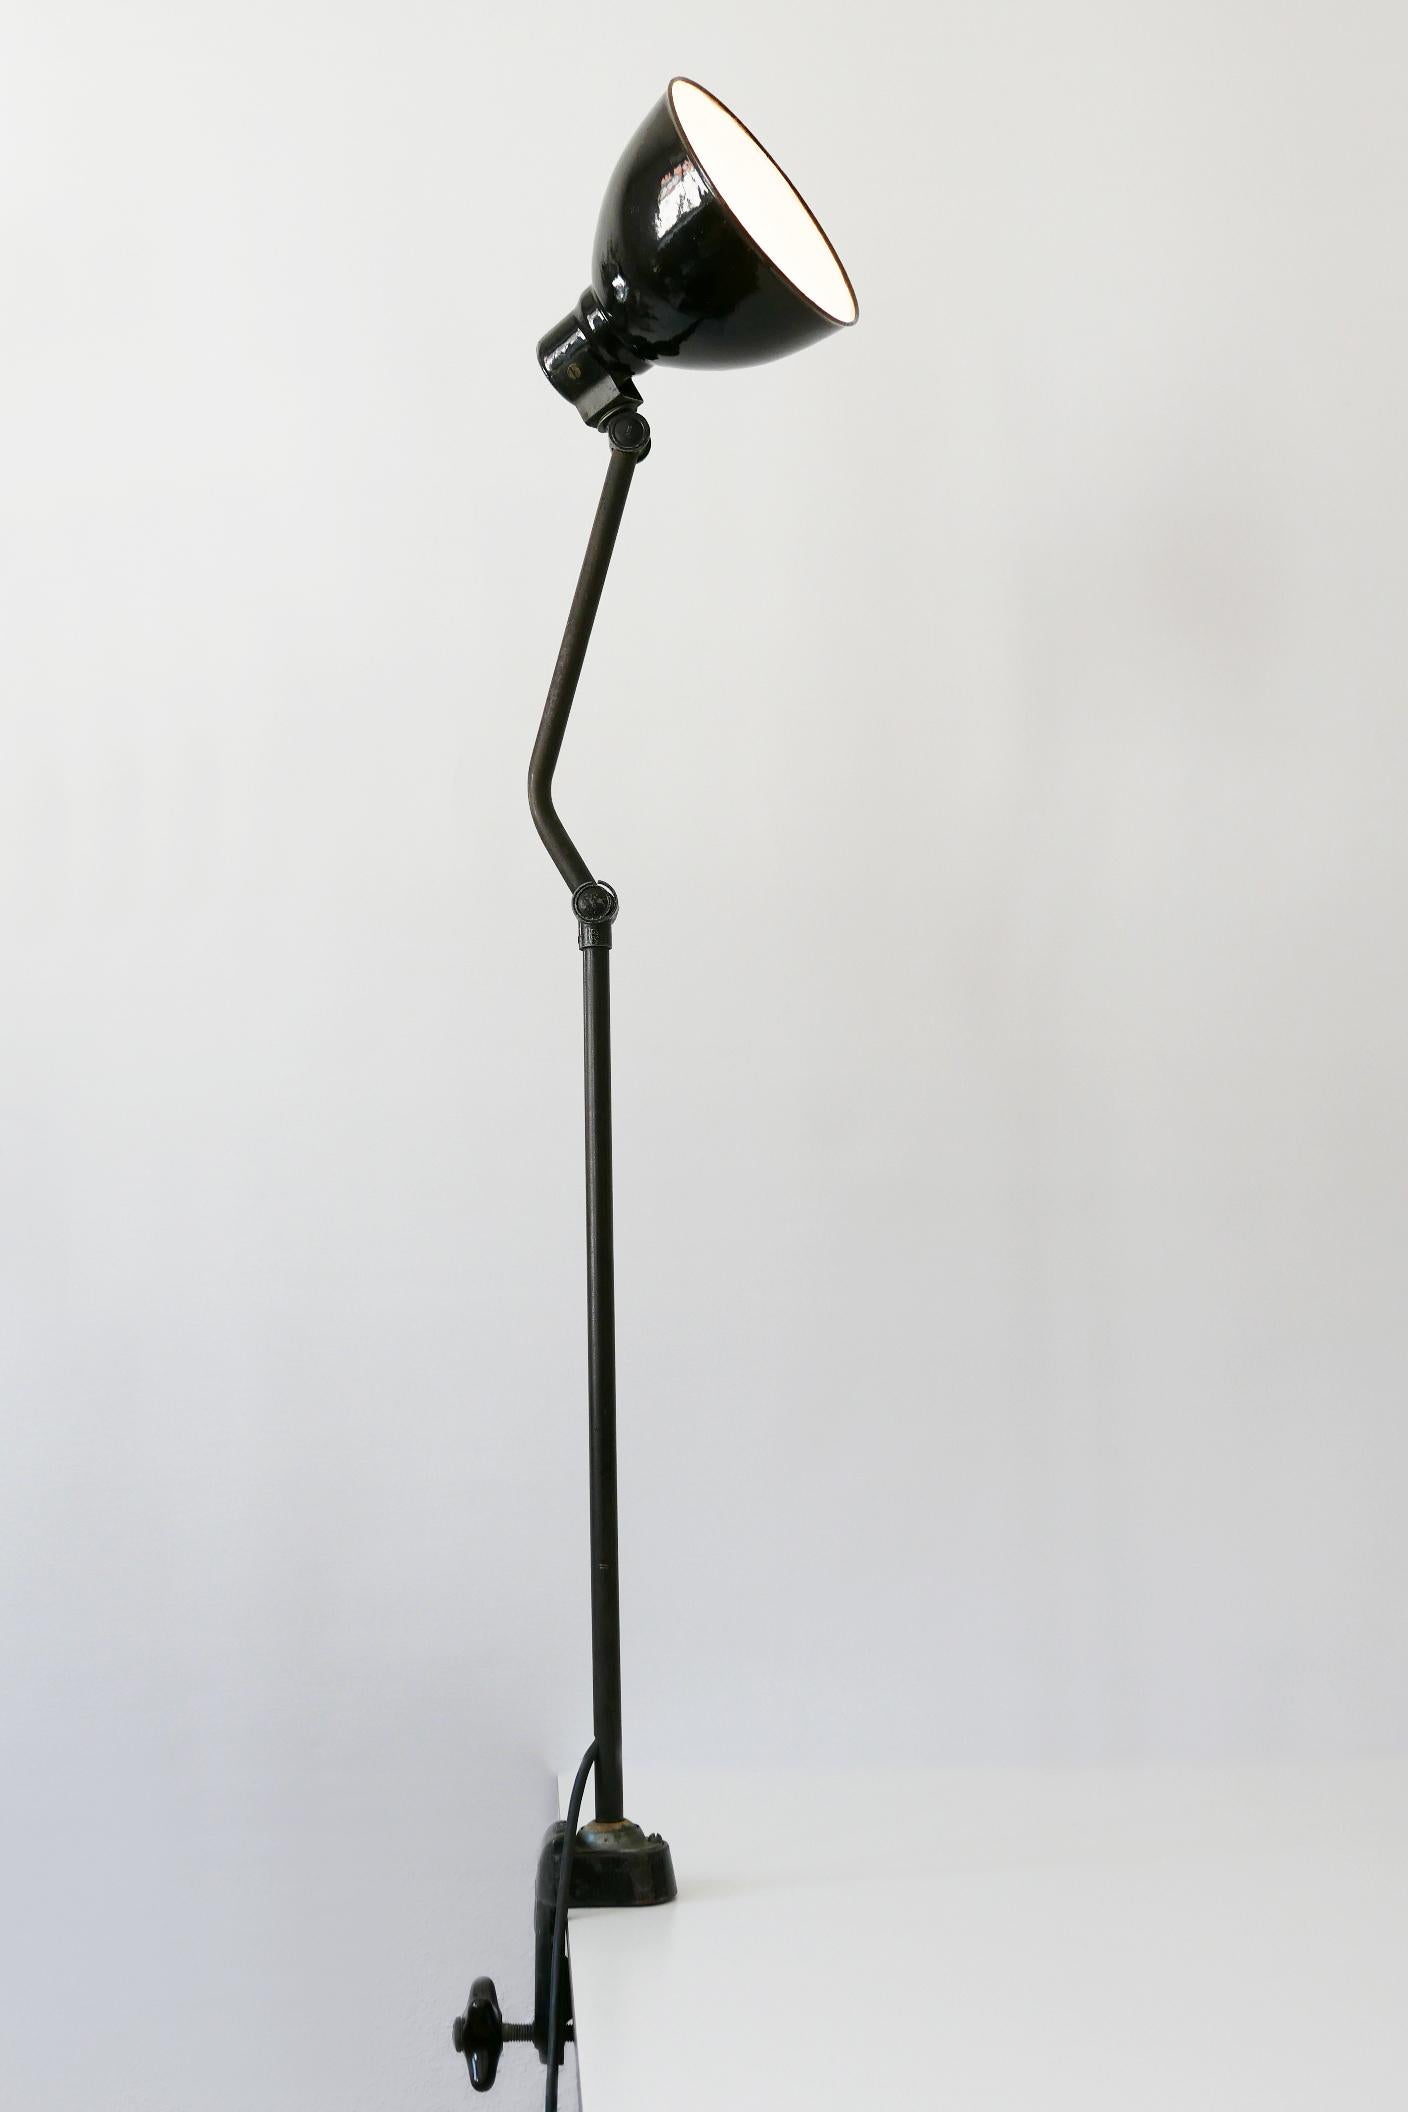 Bauhaus Task Lamp or Clamp Table Light by Peter Behrens for AEG 1920s, Germany 1